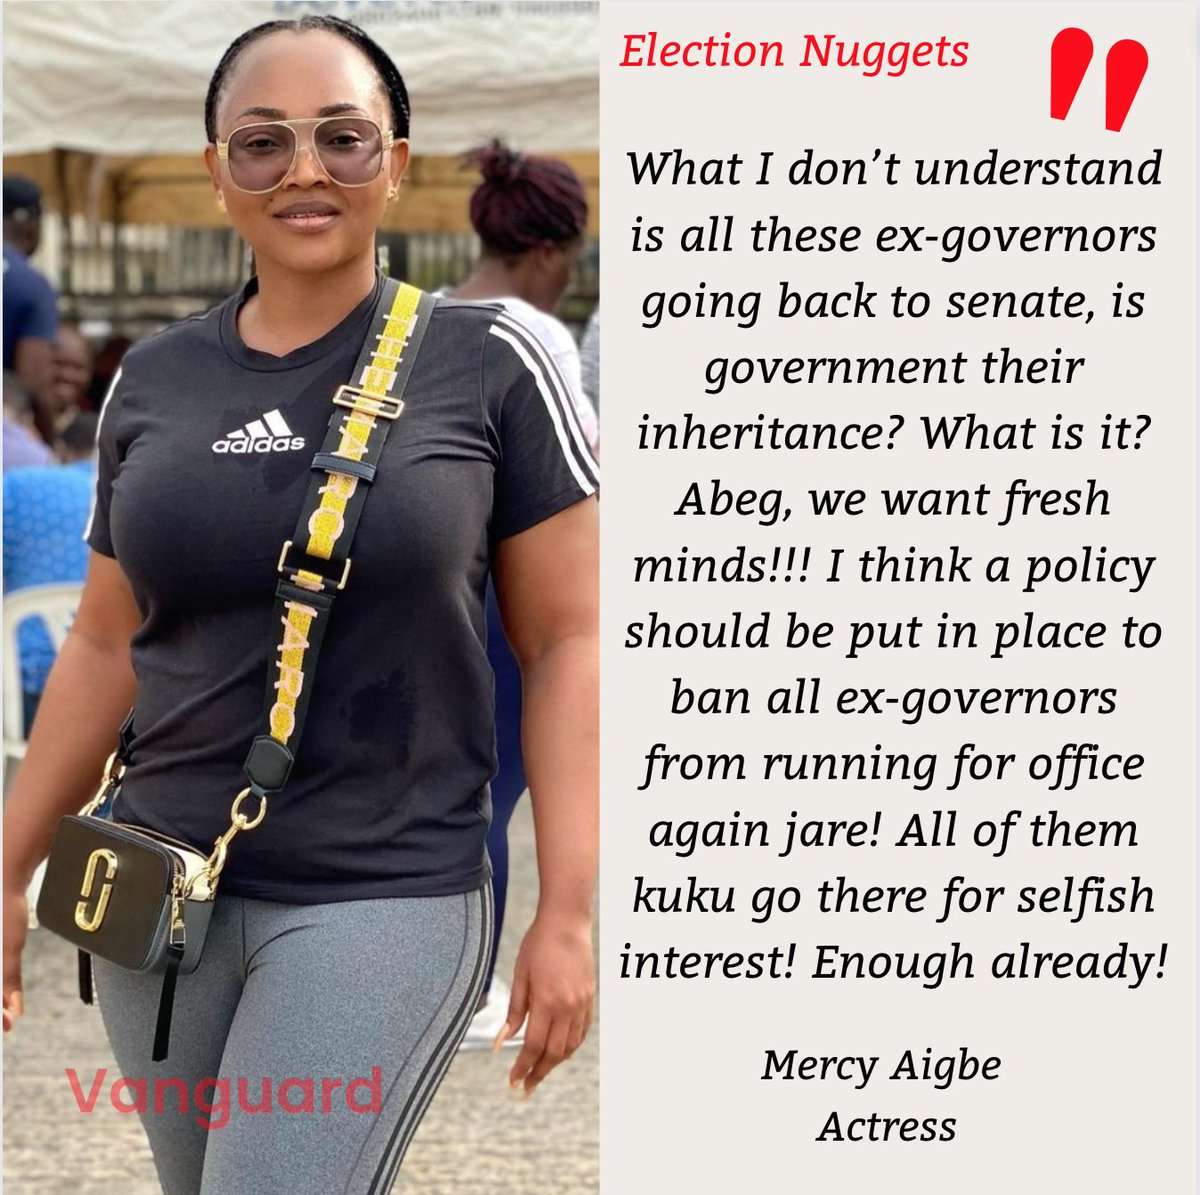 Mercy Aigbe #mercyaigbe #actress #Nollywood #2023election #exgovernors #nigeriadecides #NigeriaDecides #presidentialelection2023 #nigeria #vanguardnewspapers